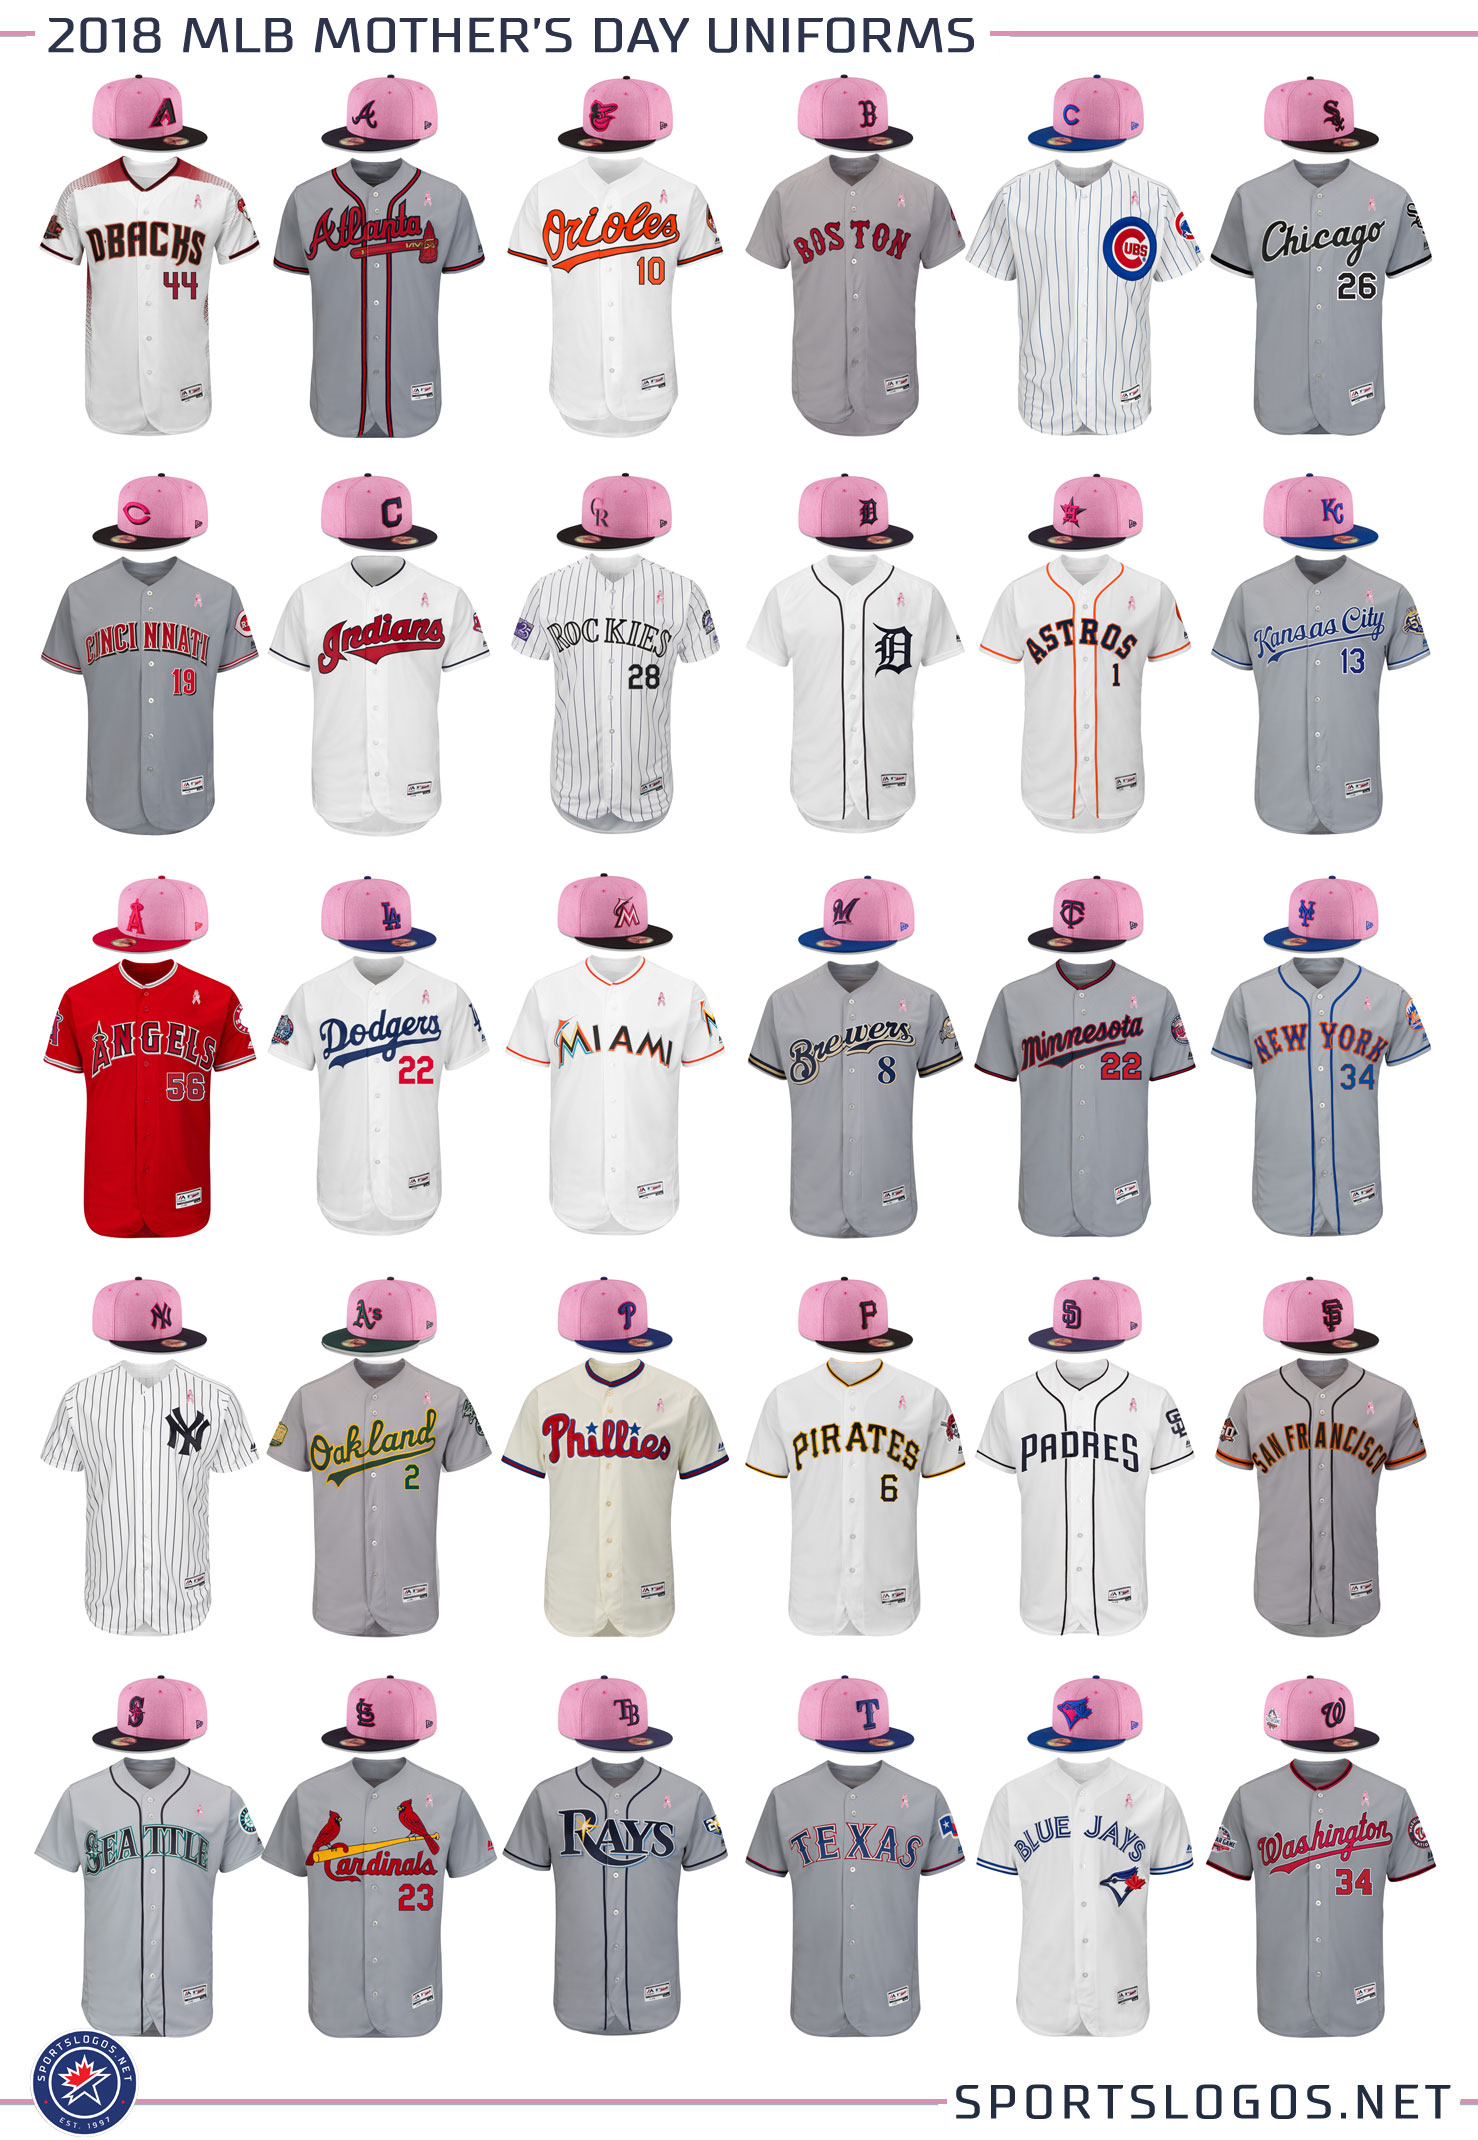 Happy Mother's Day: All 30 MLB Teams Wear Pink and Grey in Honour